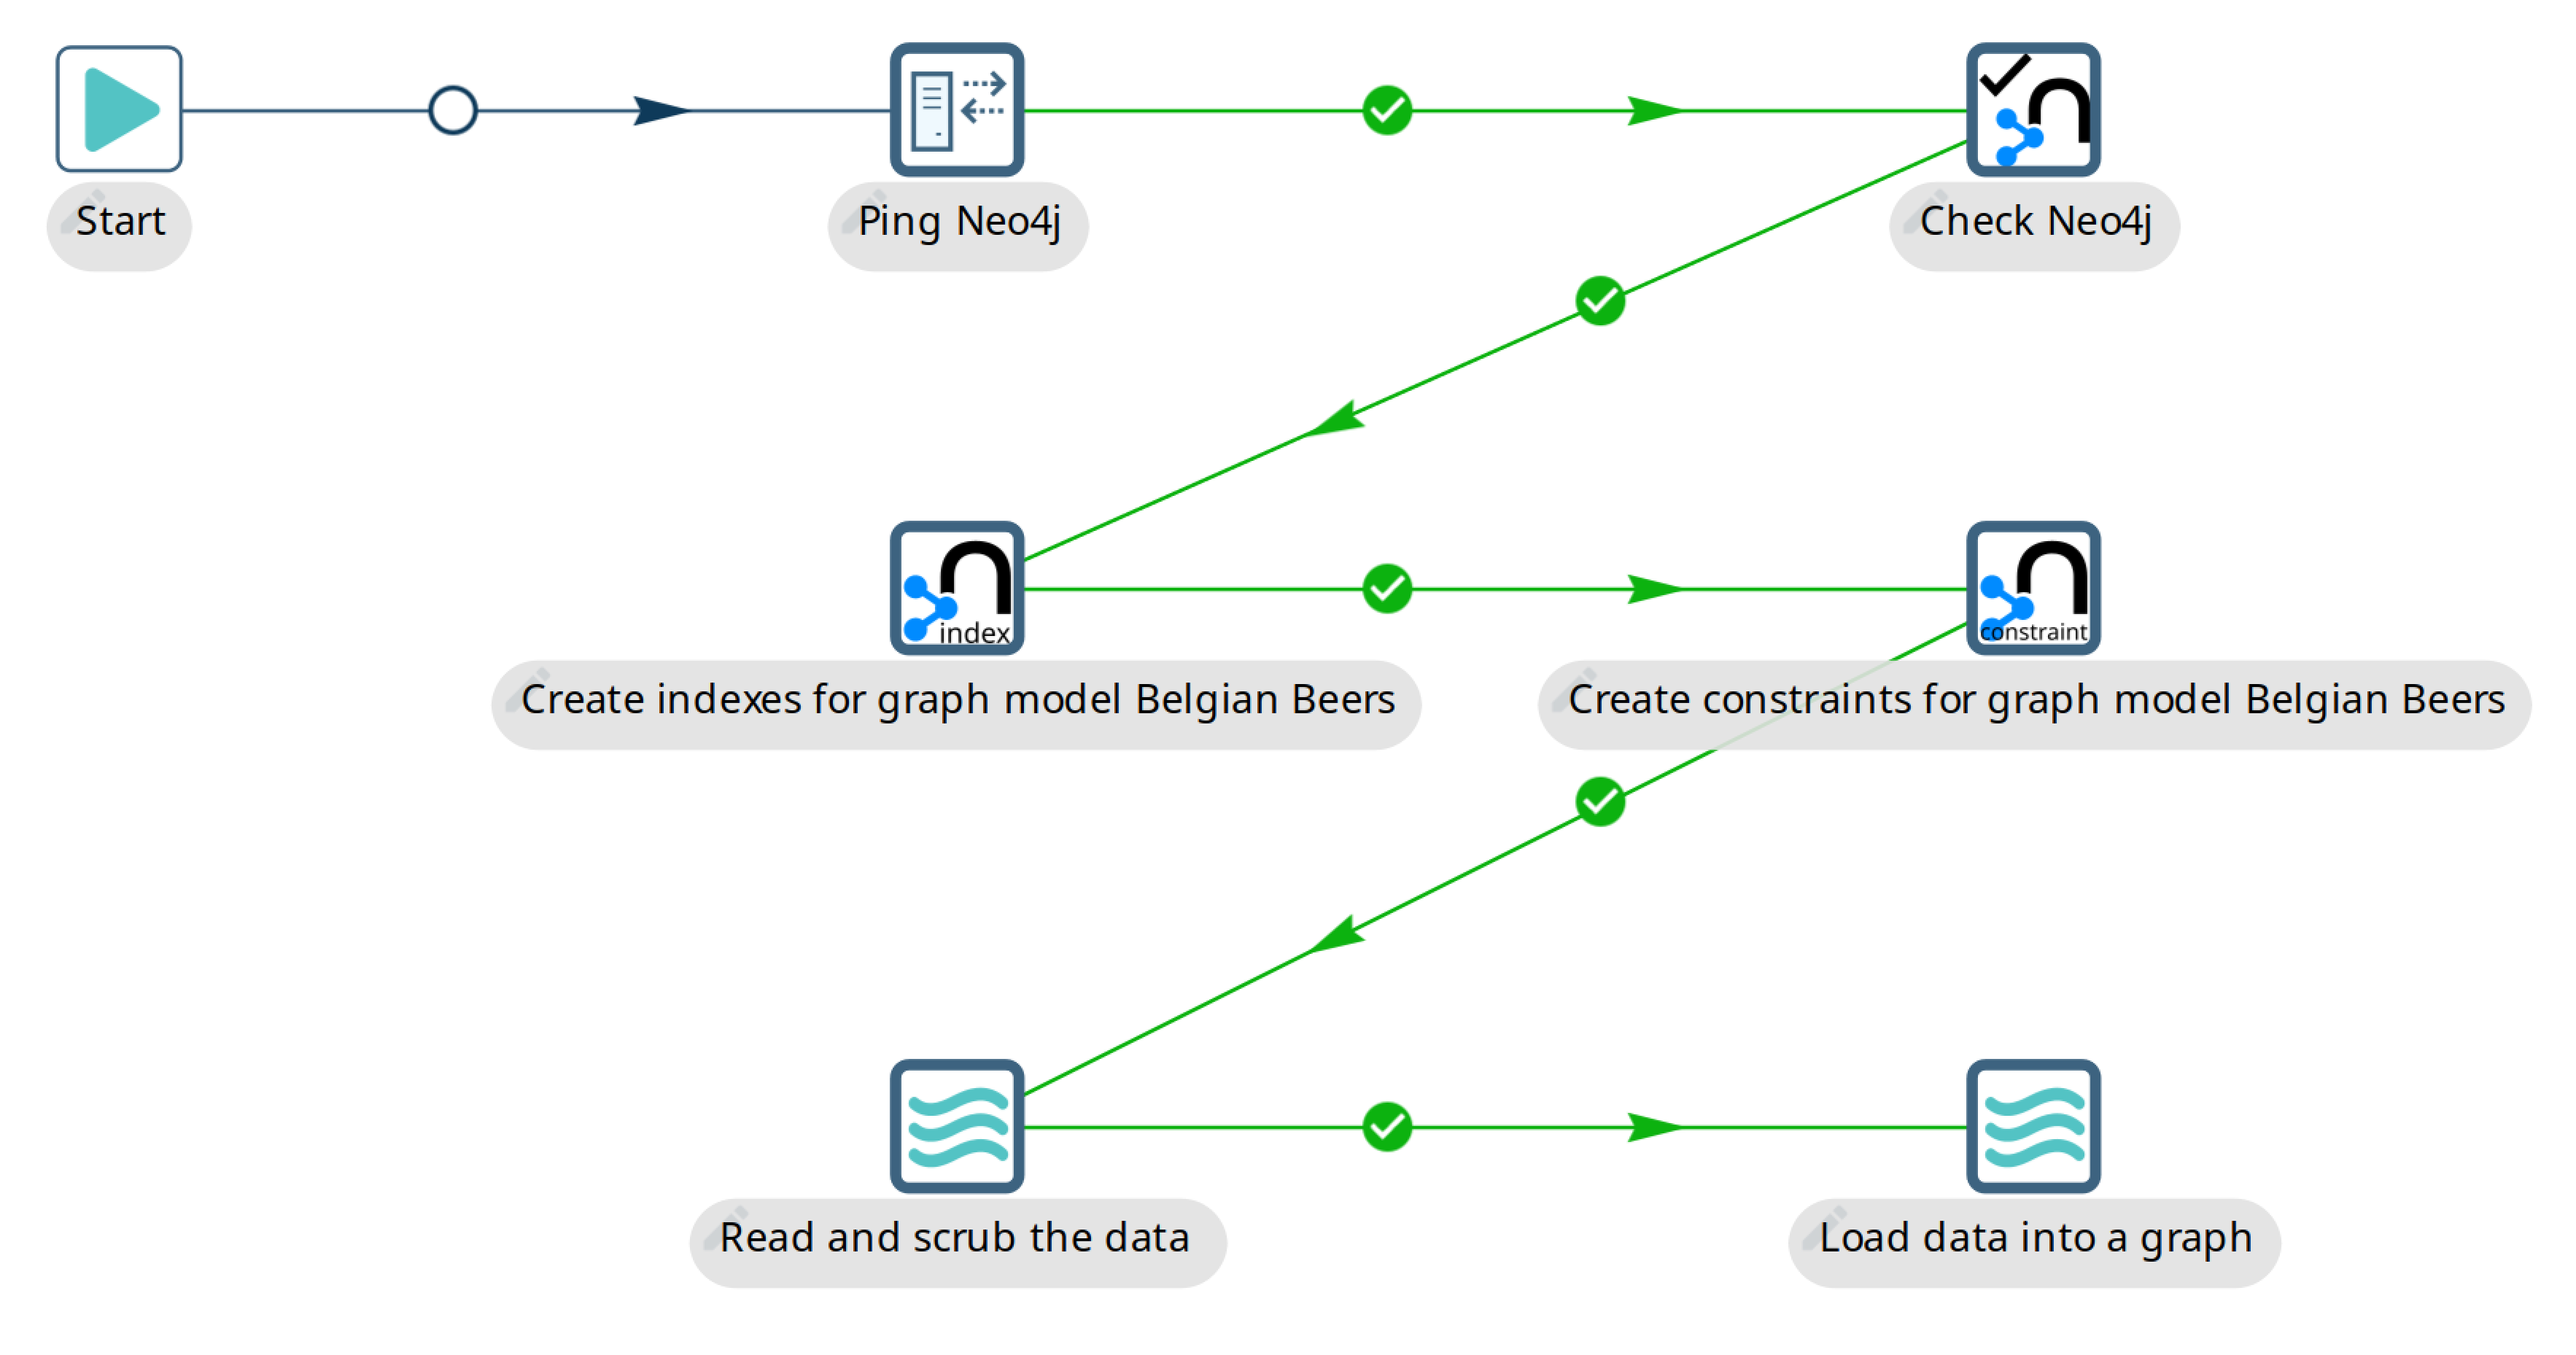 The beers wikipedia workflow